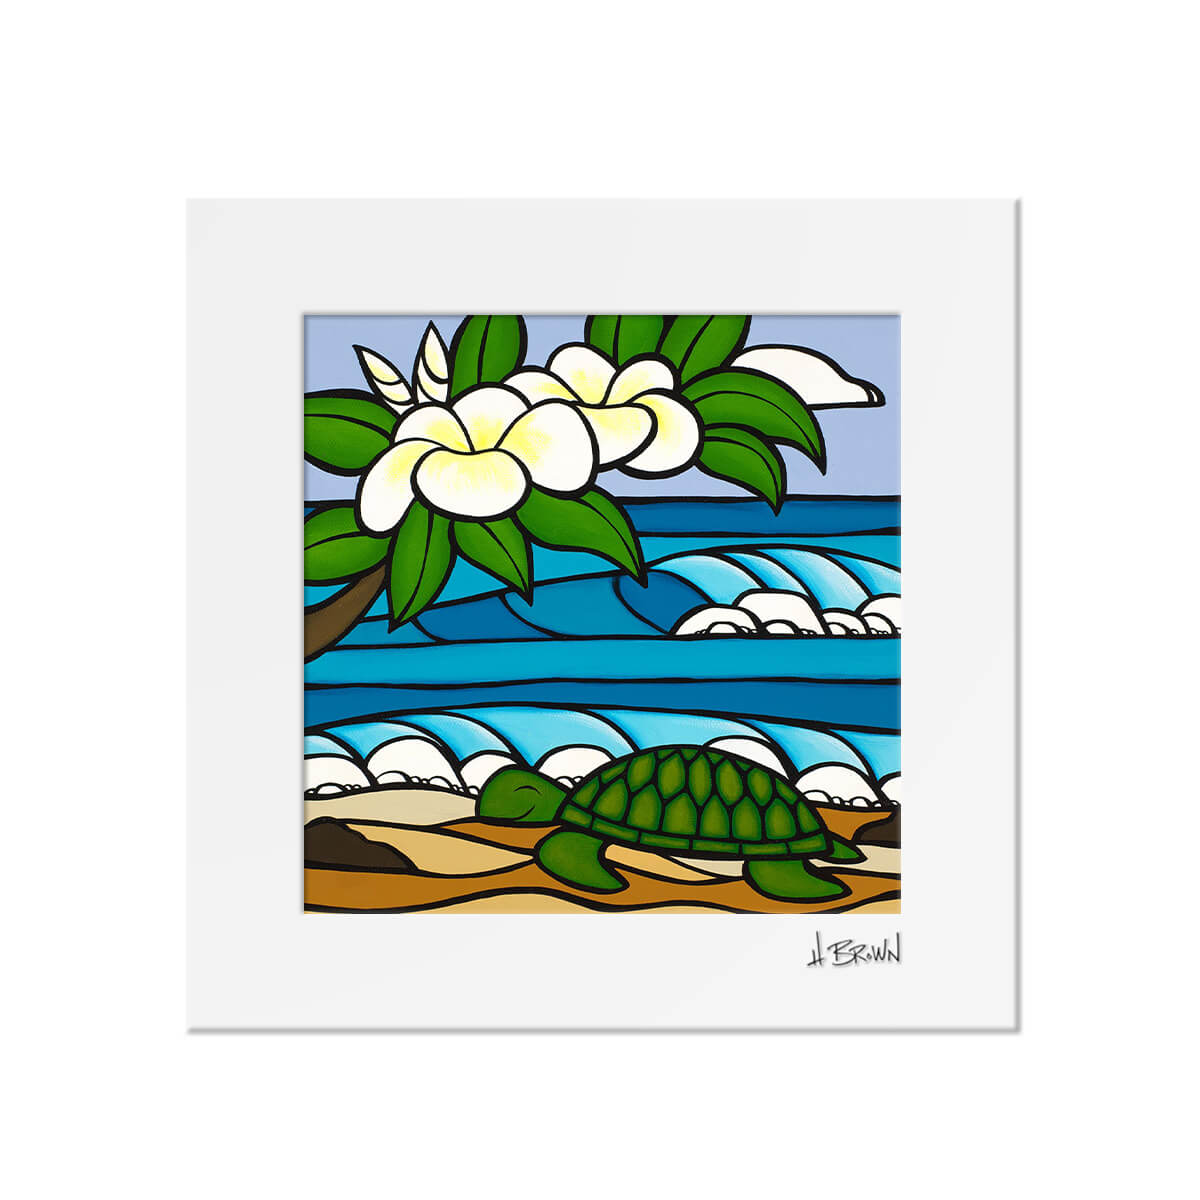 Matted art print by Hawaii artist Heather Brown featuring a sleeping honu, or sea turtle, on the beach underneath a white plumeria tree